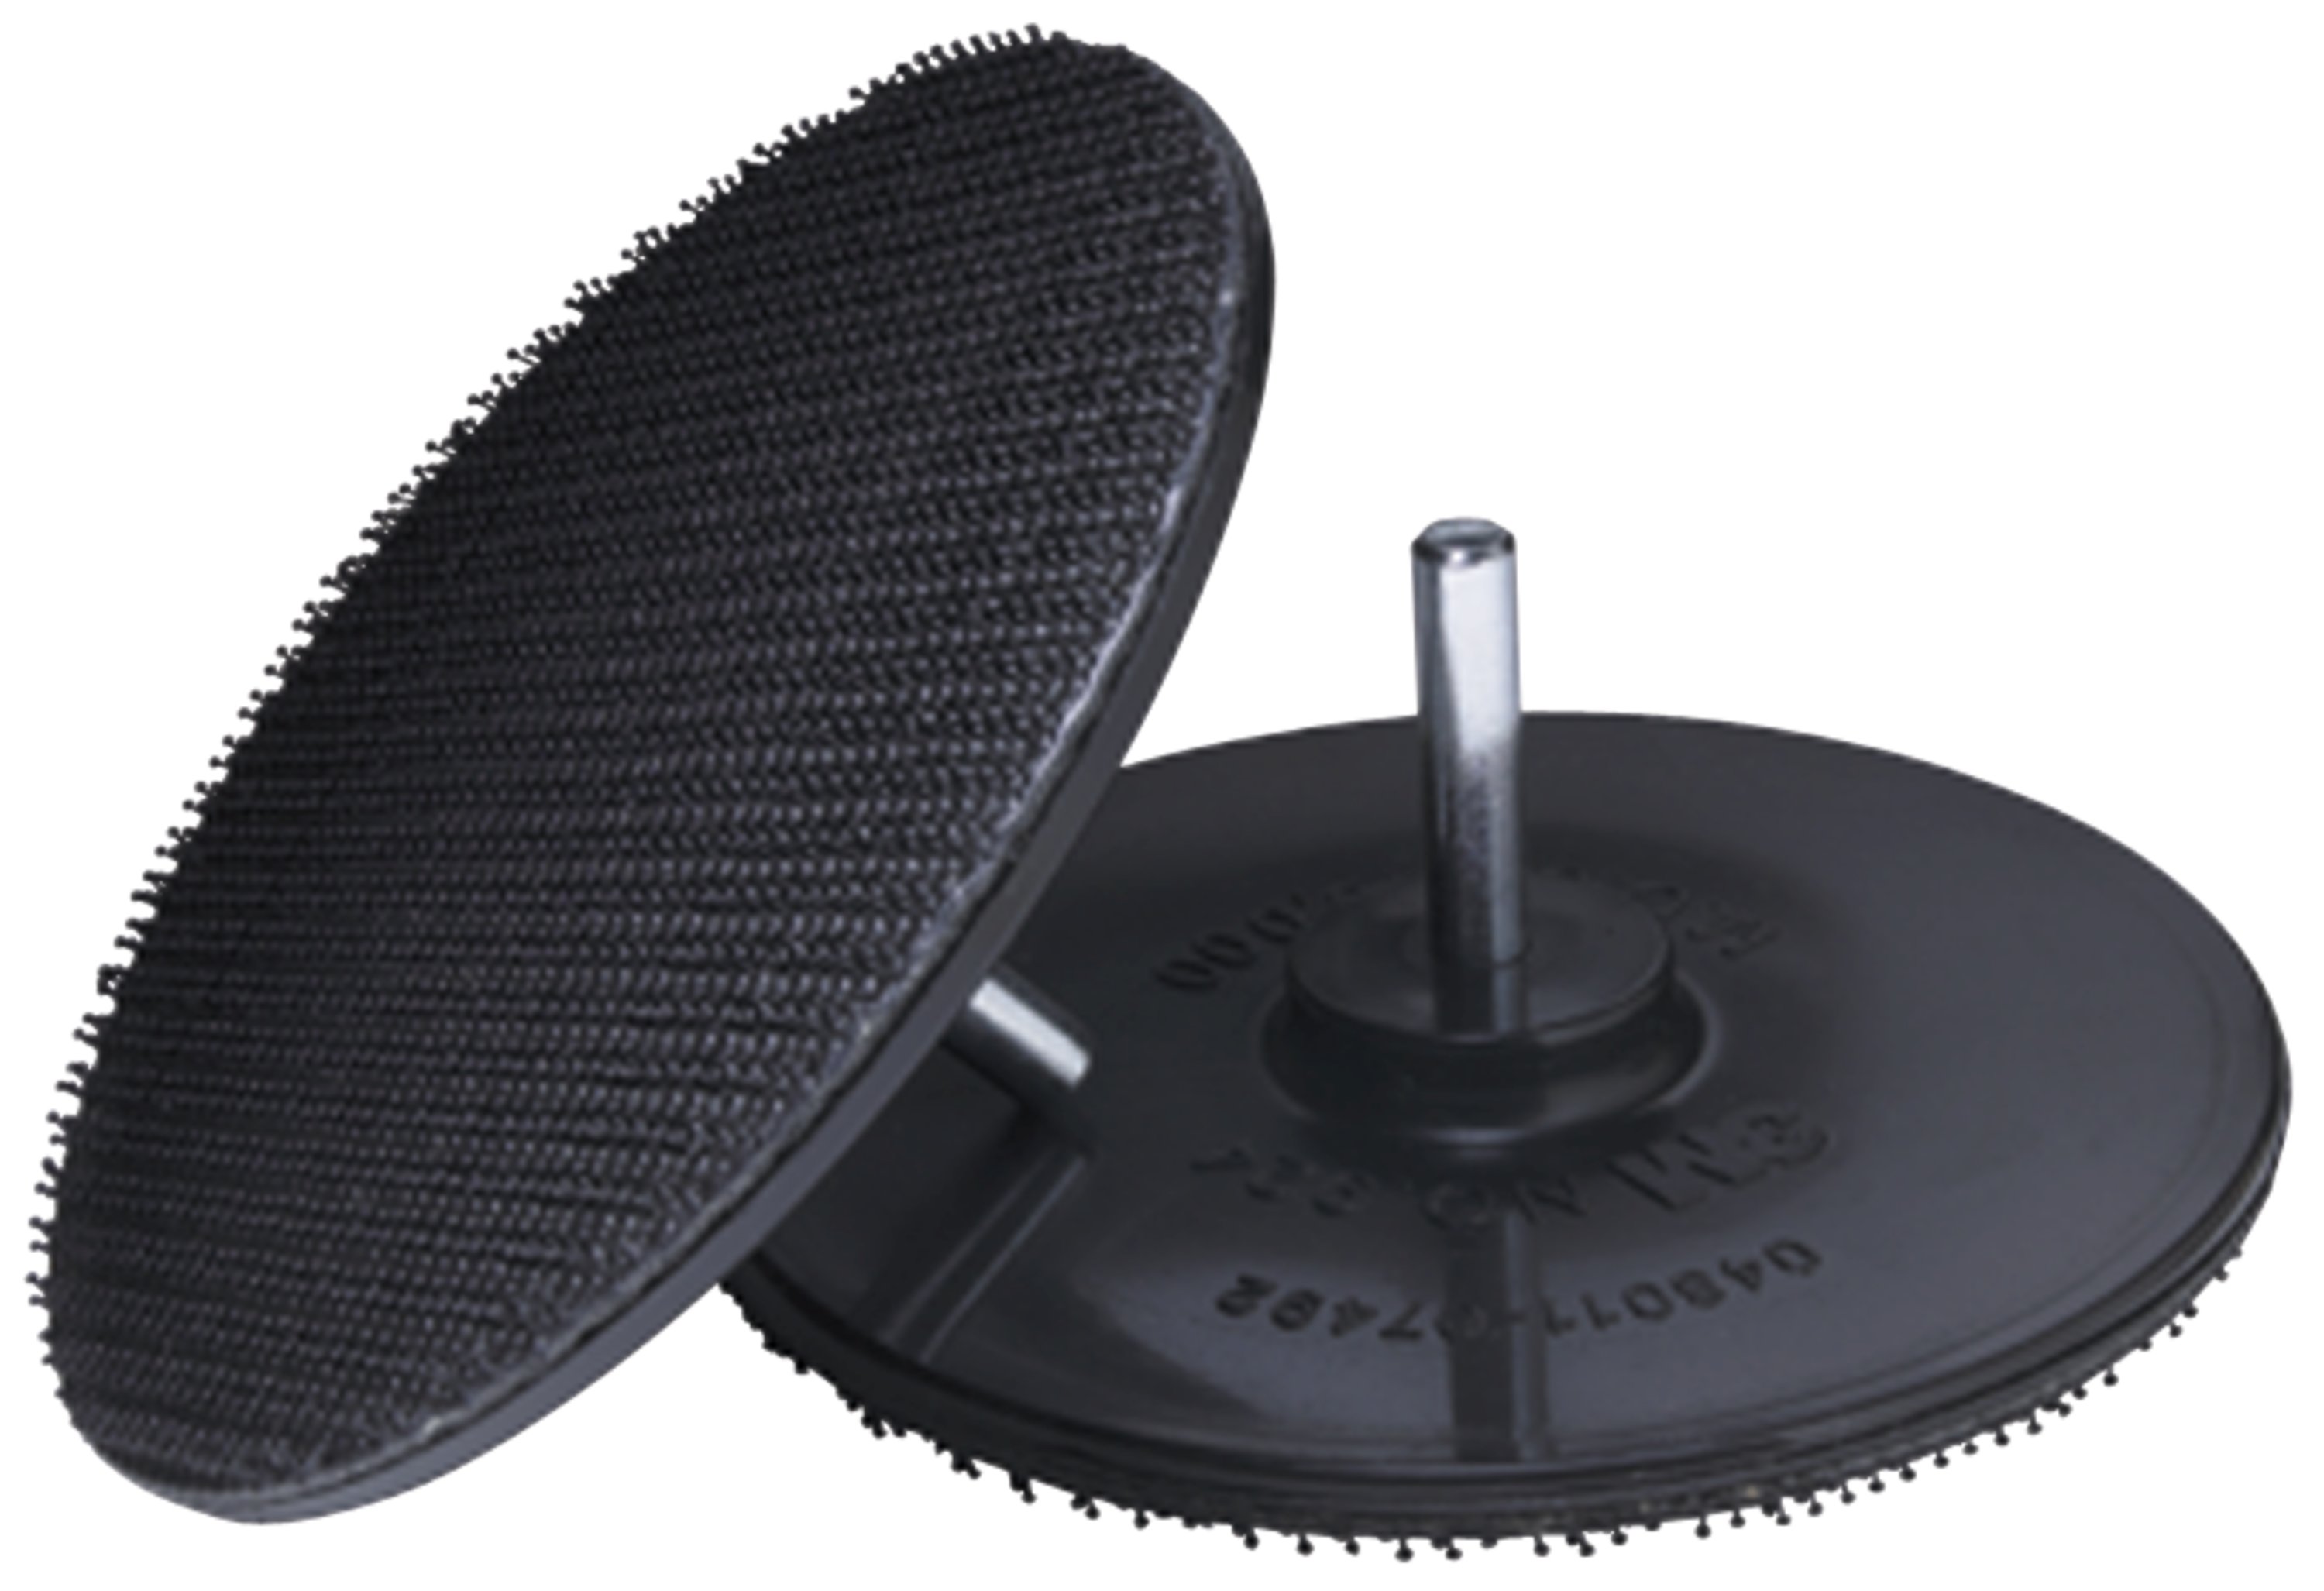 Using the Scotch-Brite™ Disc Pad is as simple as threading the pad onto the power tool and then attaching the disc to the pad face.